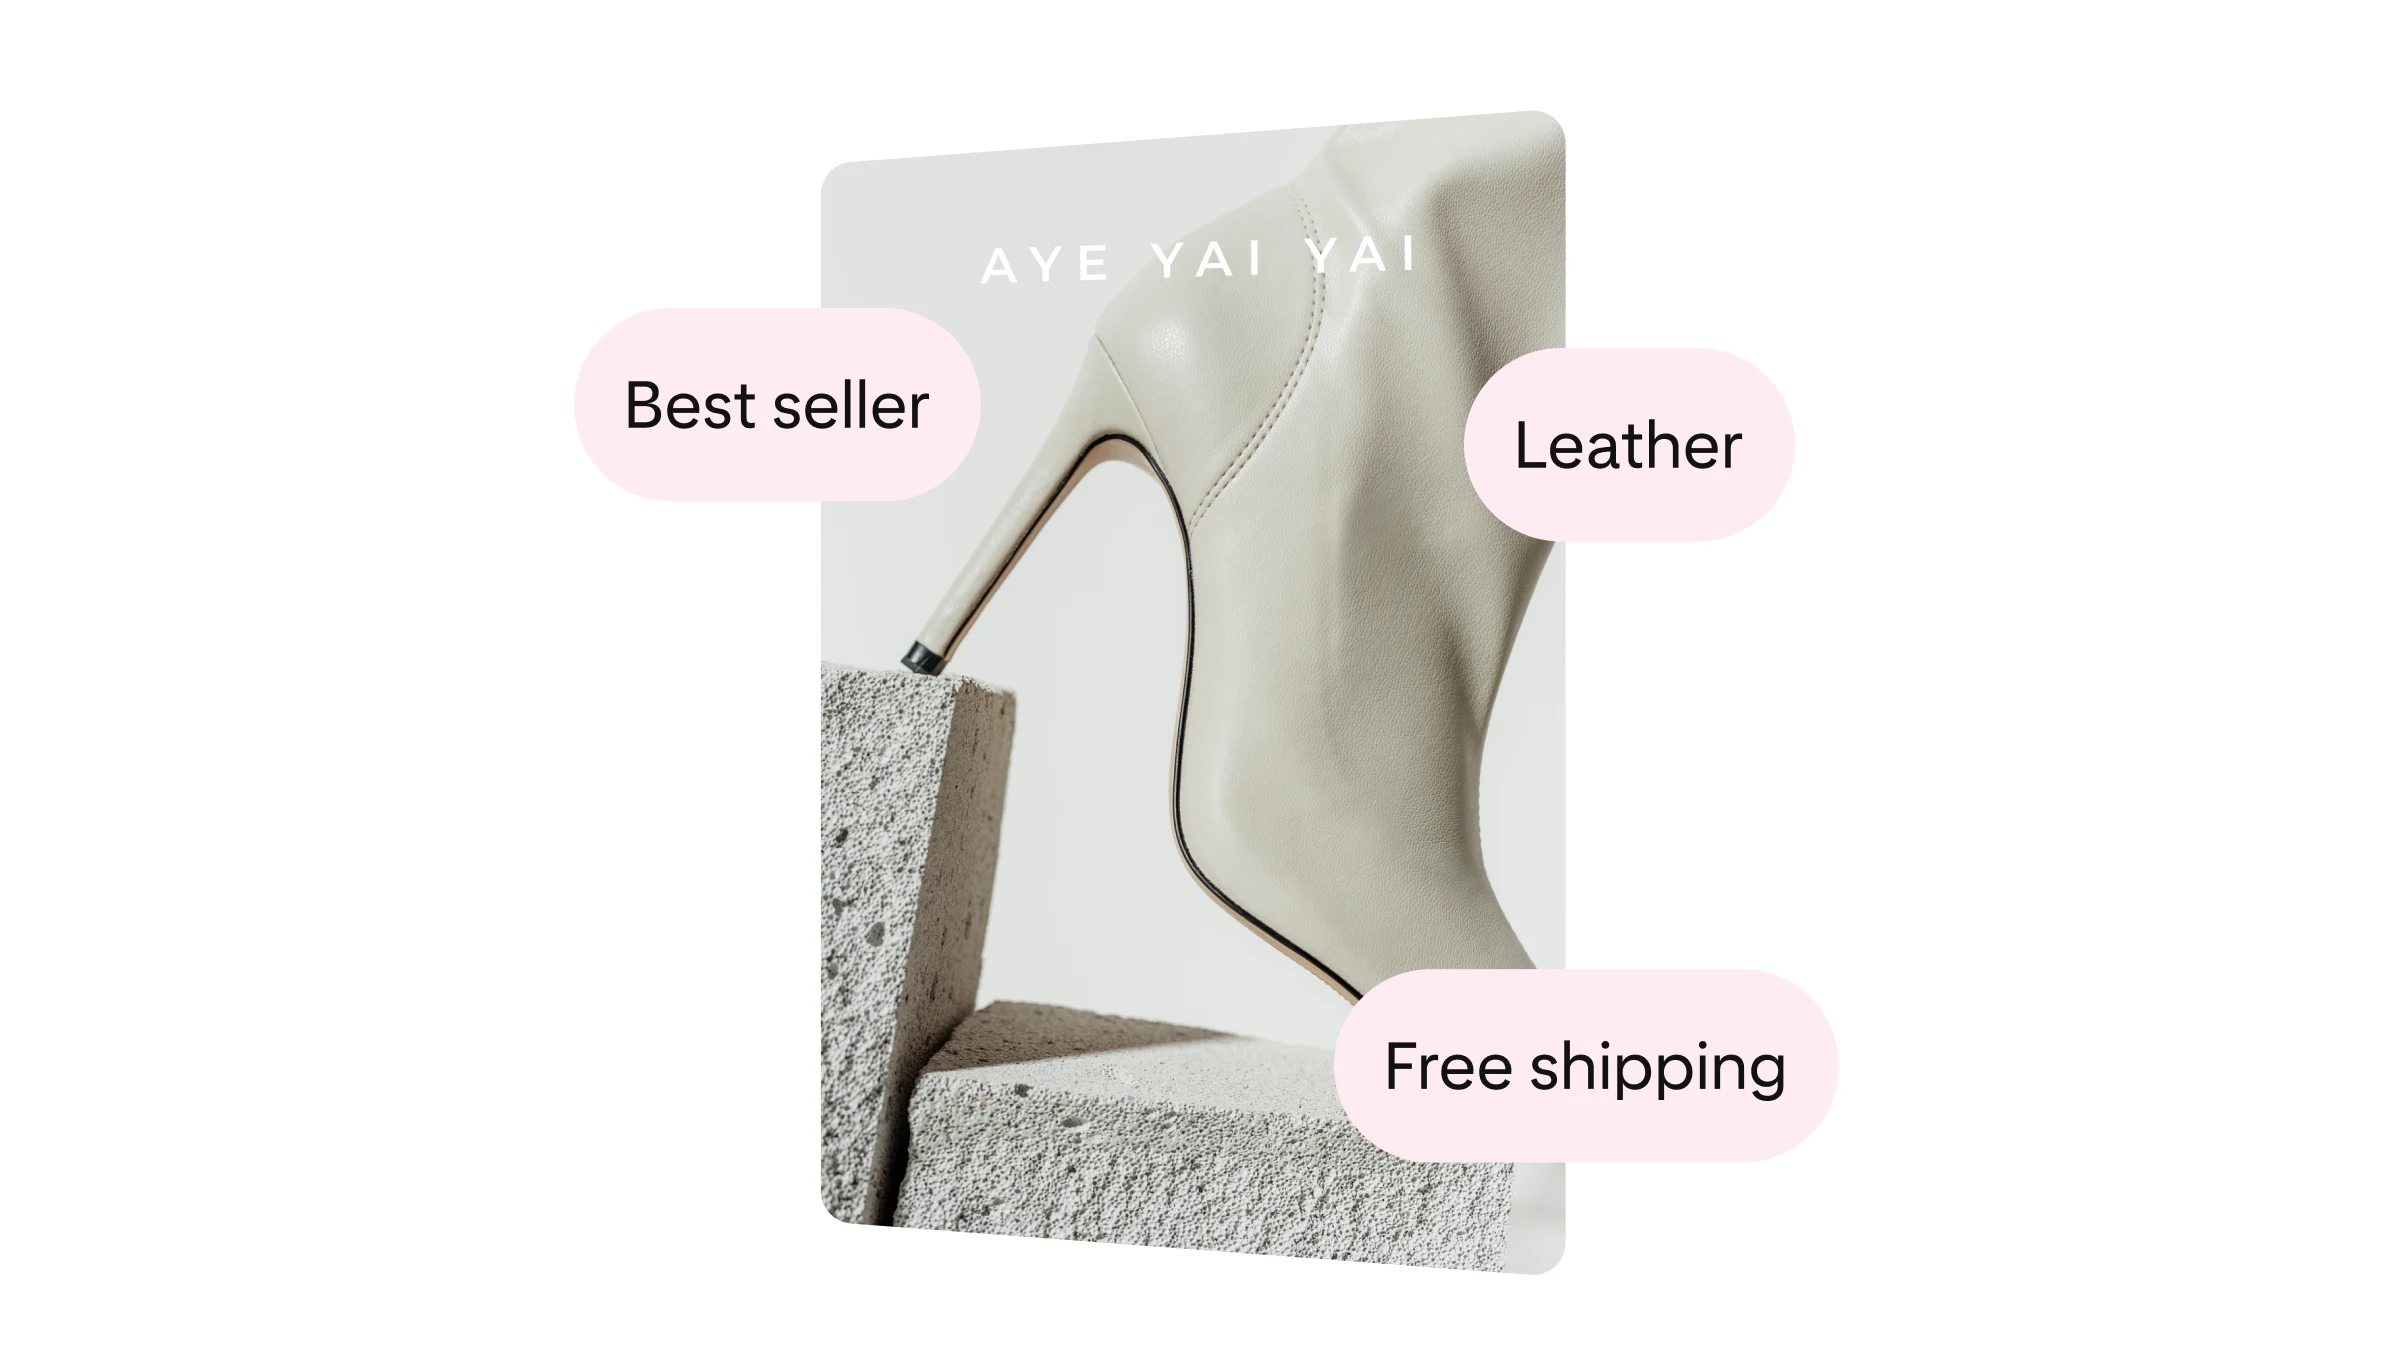 Aye Yai Yai promotes their white leather boots, with copy showing they’re best sellers and ship for free.